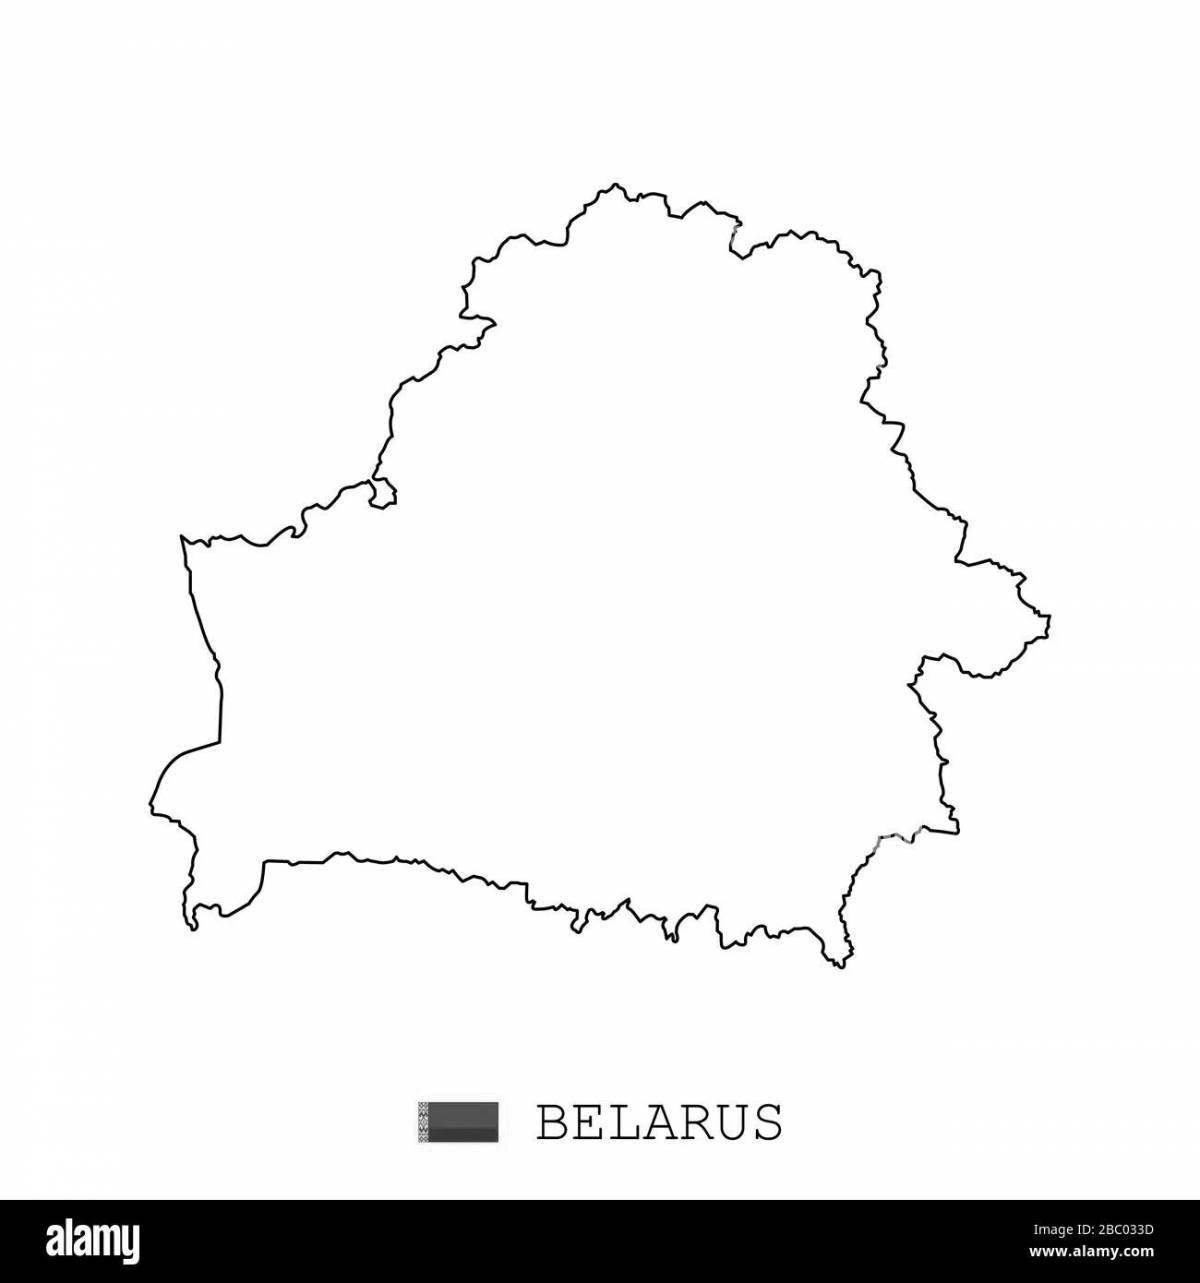 Fun coloring map of Belarus for the little ones